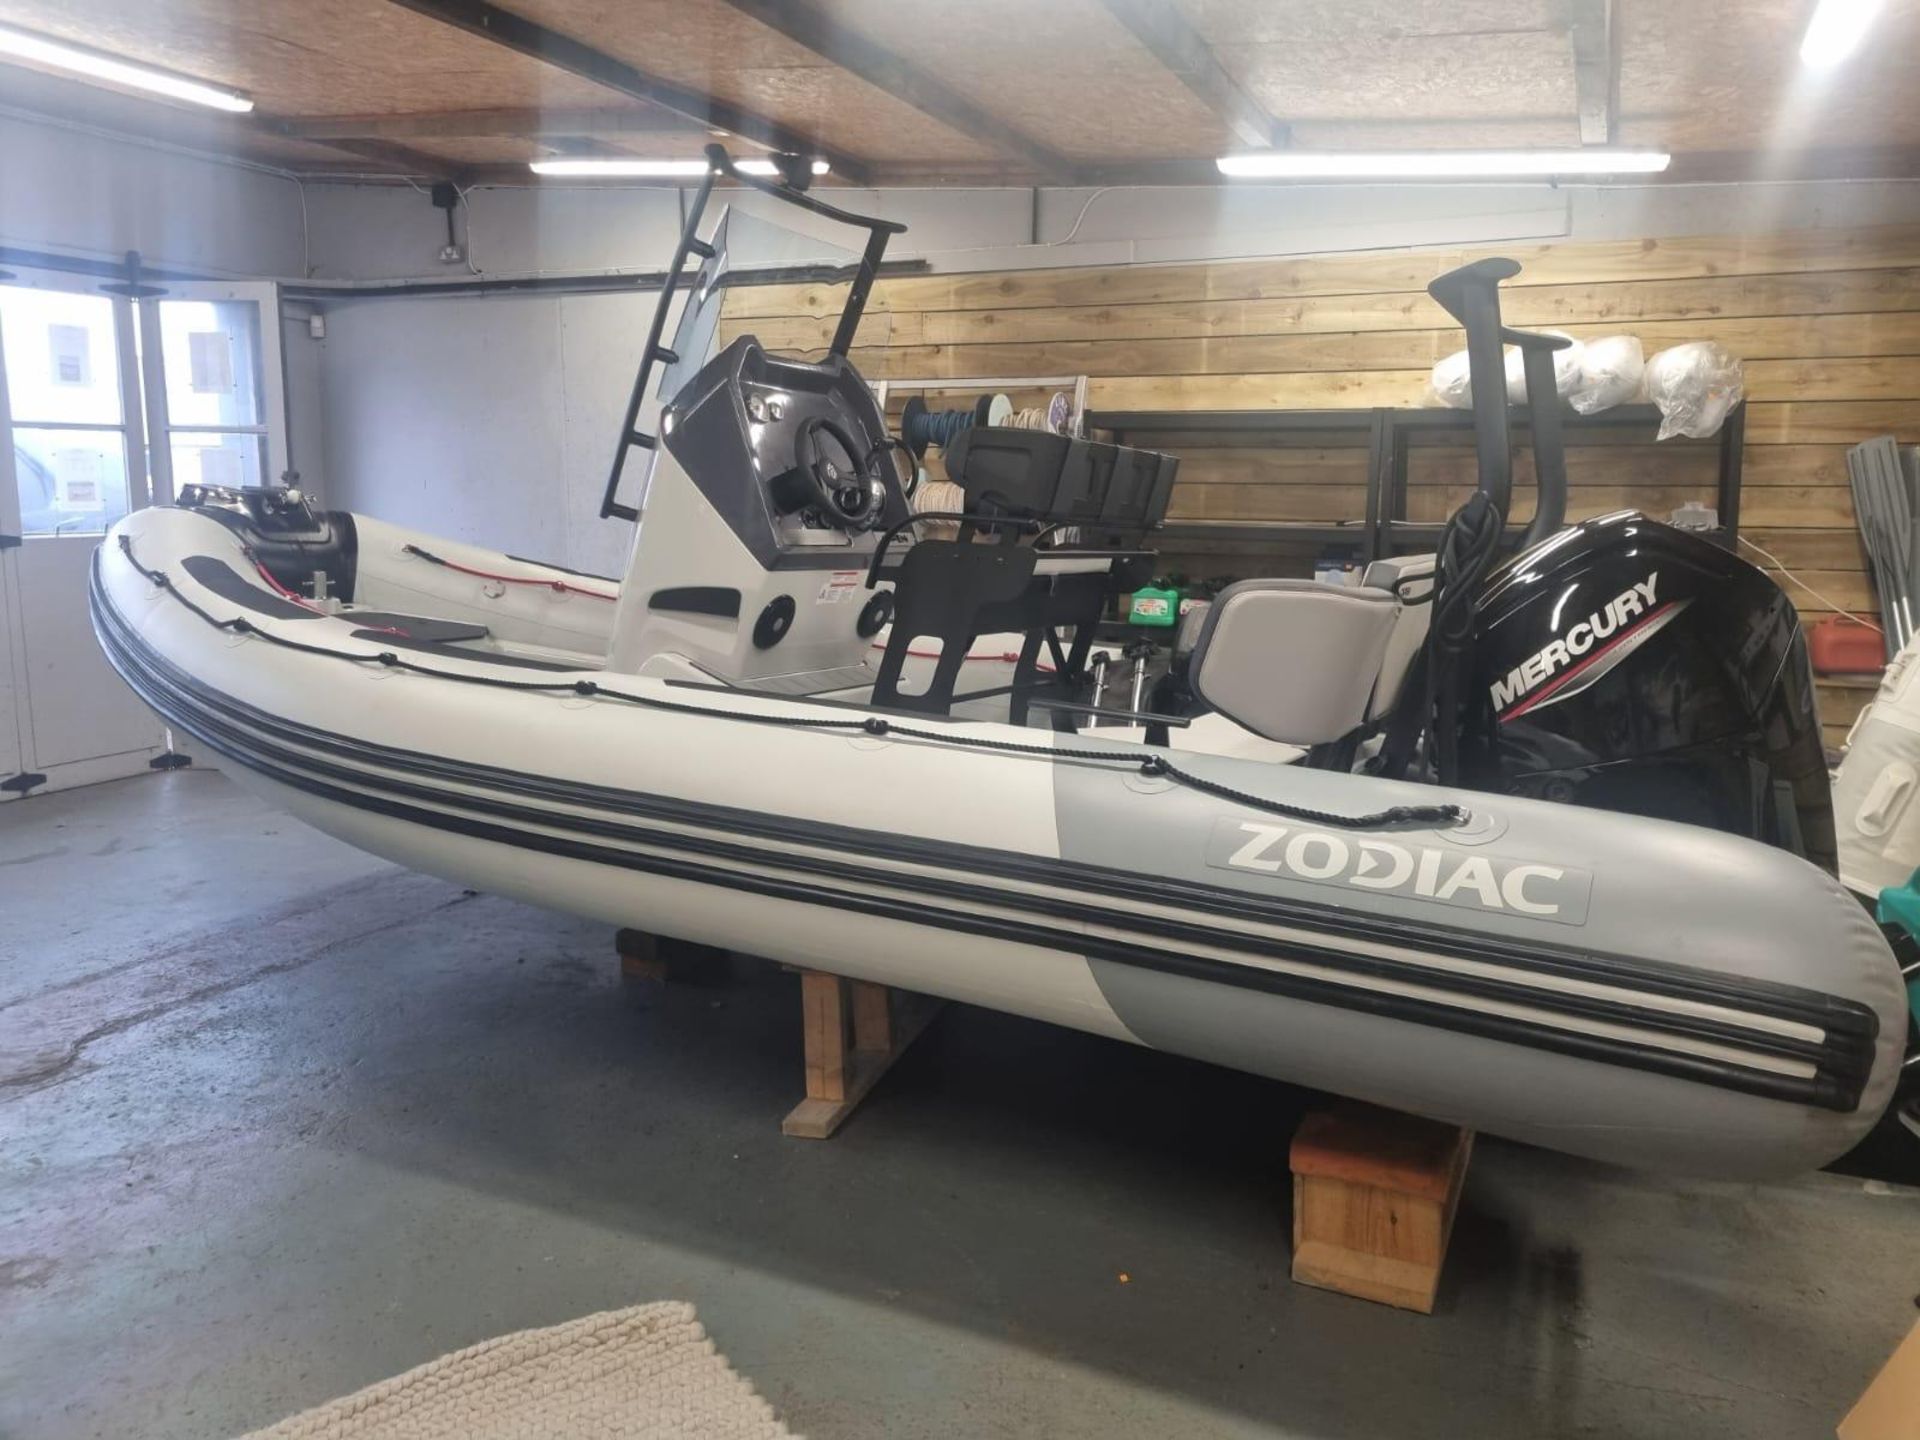 Zodiac Open 5.5m rigid inflatable boat with Mercury 115hp four stroke engine. - Image 2 of 8